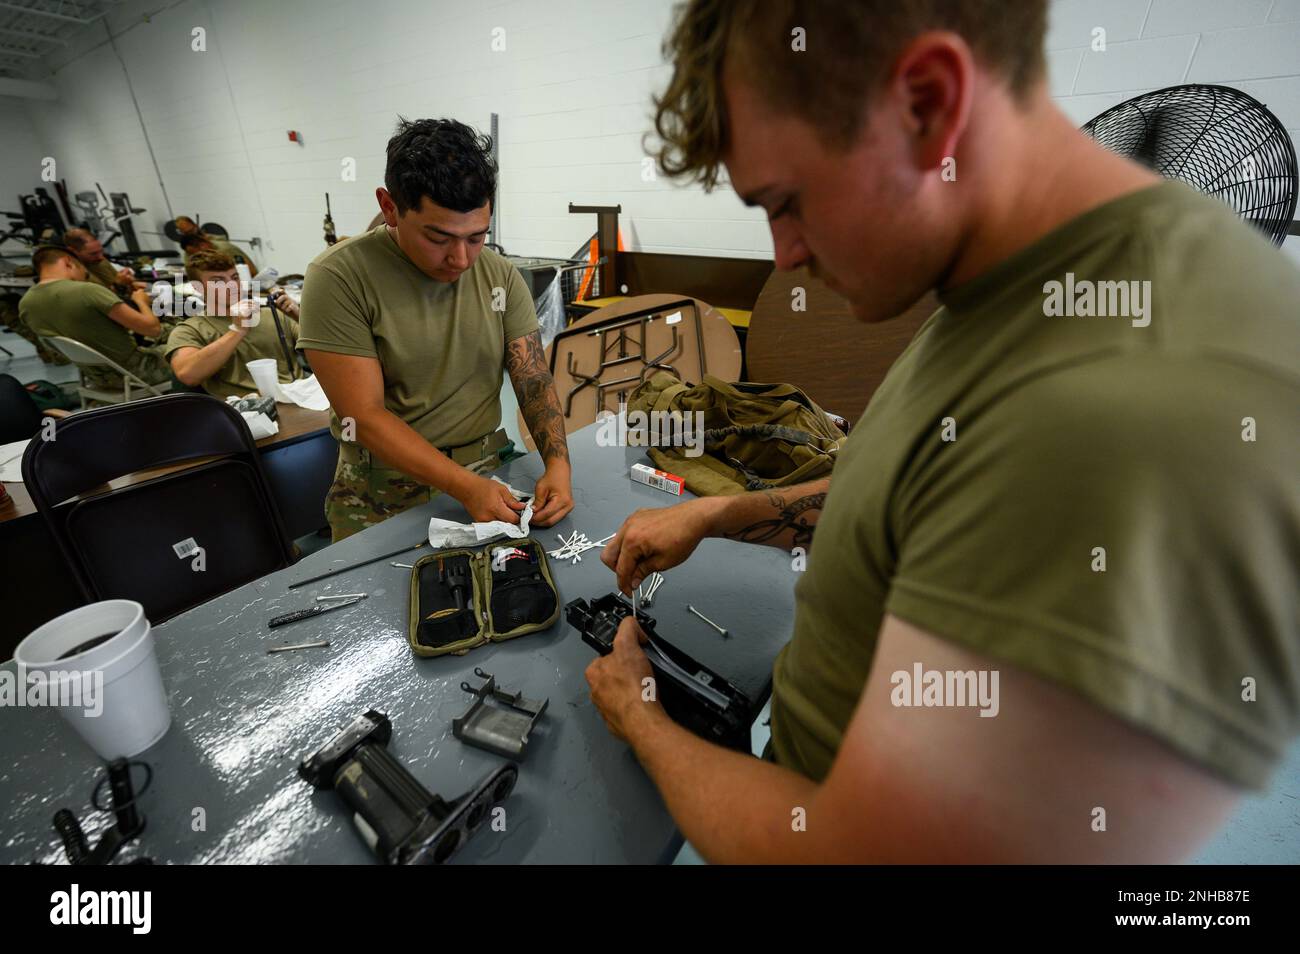 New Jersey Army National Guard Soldiers from Bravo Company, 1st Battalion, 114th Infantry Regiment, conduct weapons maintenance at the Freehold National Guard Armory in Freehold, New Jersey, July 28, 2022. The Soldiers are cleaning their weapons after returning from the eXportable Combat Training Capability (XCTC) exercise, where more than 2,500 Soldiers participated in training event held in Fort Drum, New York, which enables brigade combat teams to achieve the trained platoon readiness necessary to deploy, fight, and win. Stock Photo